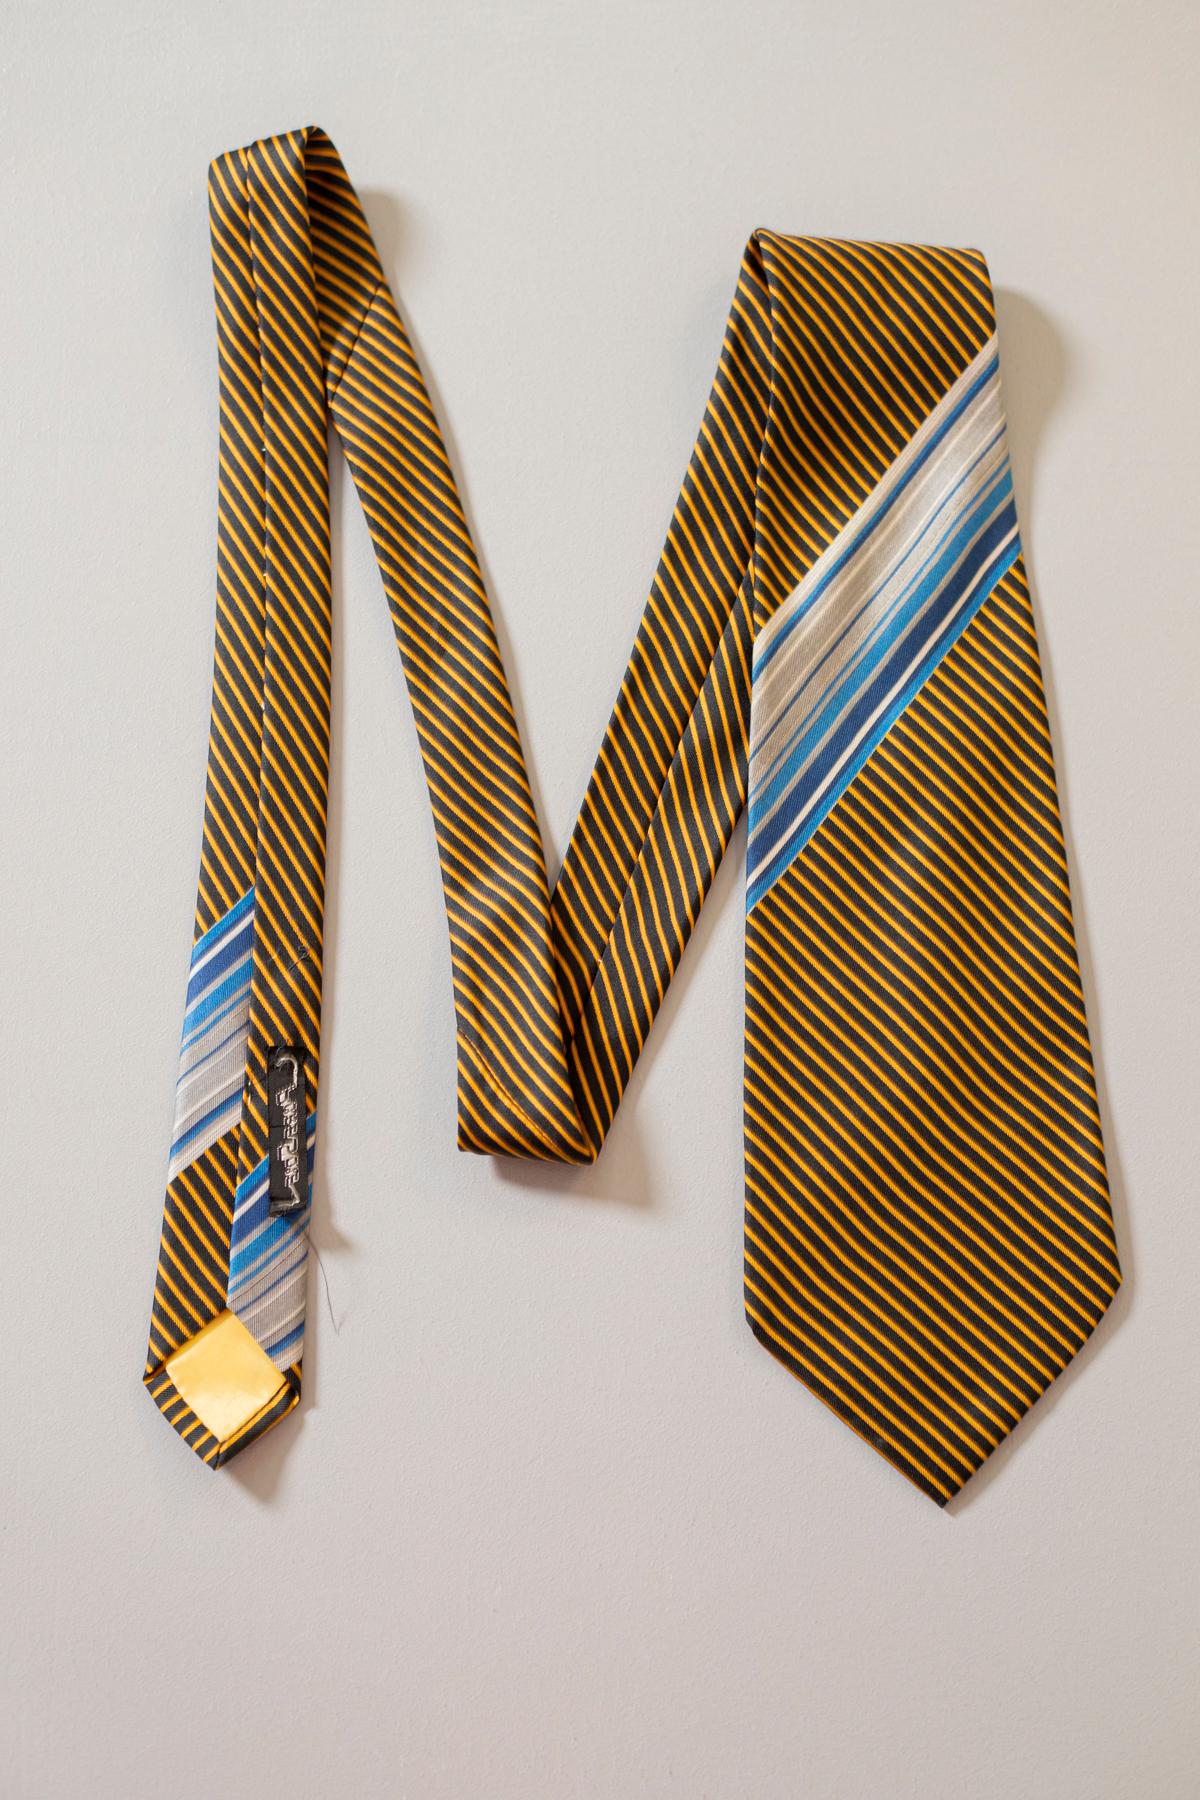 Vintage tie designed by Pierre Belmain, it is made of silk. Decorated with small yellow stripes on a black background and a large blue / gray script. With a very elegant and formal design, this tie is perfect for lovers of a classic taste, who want